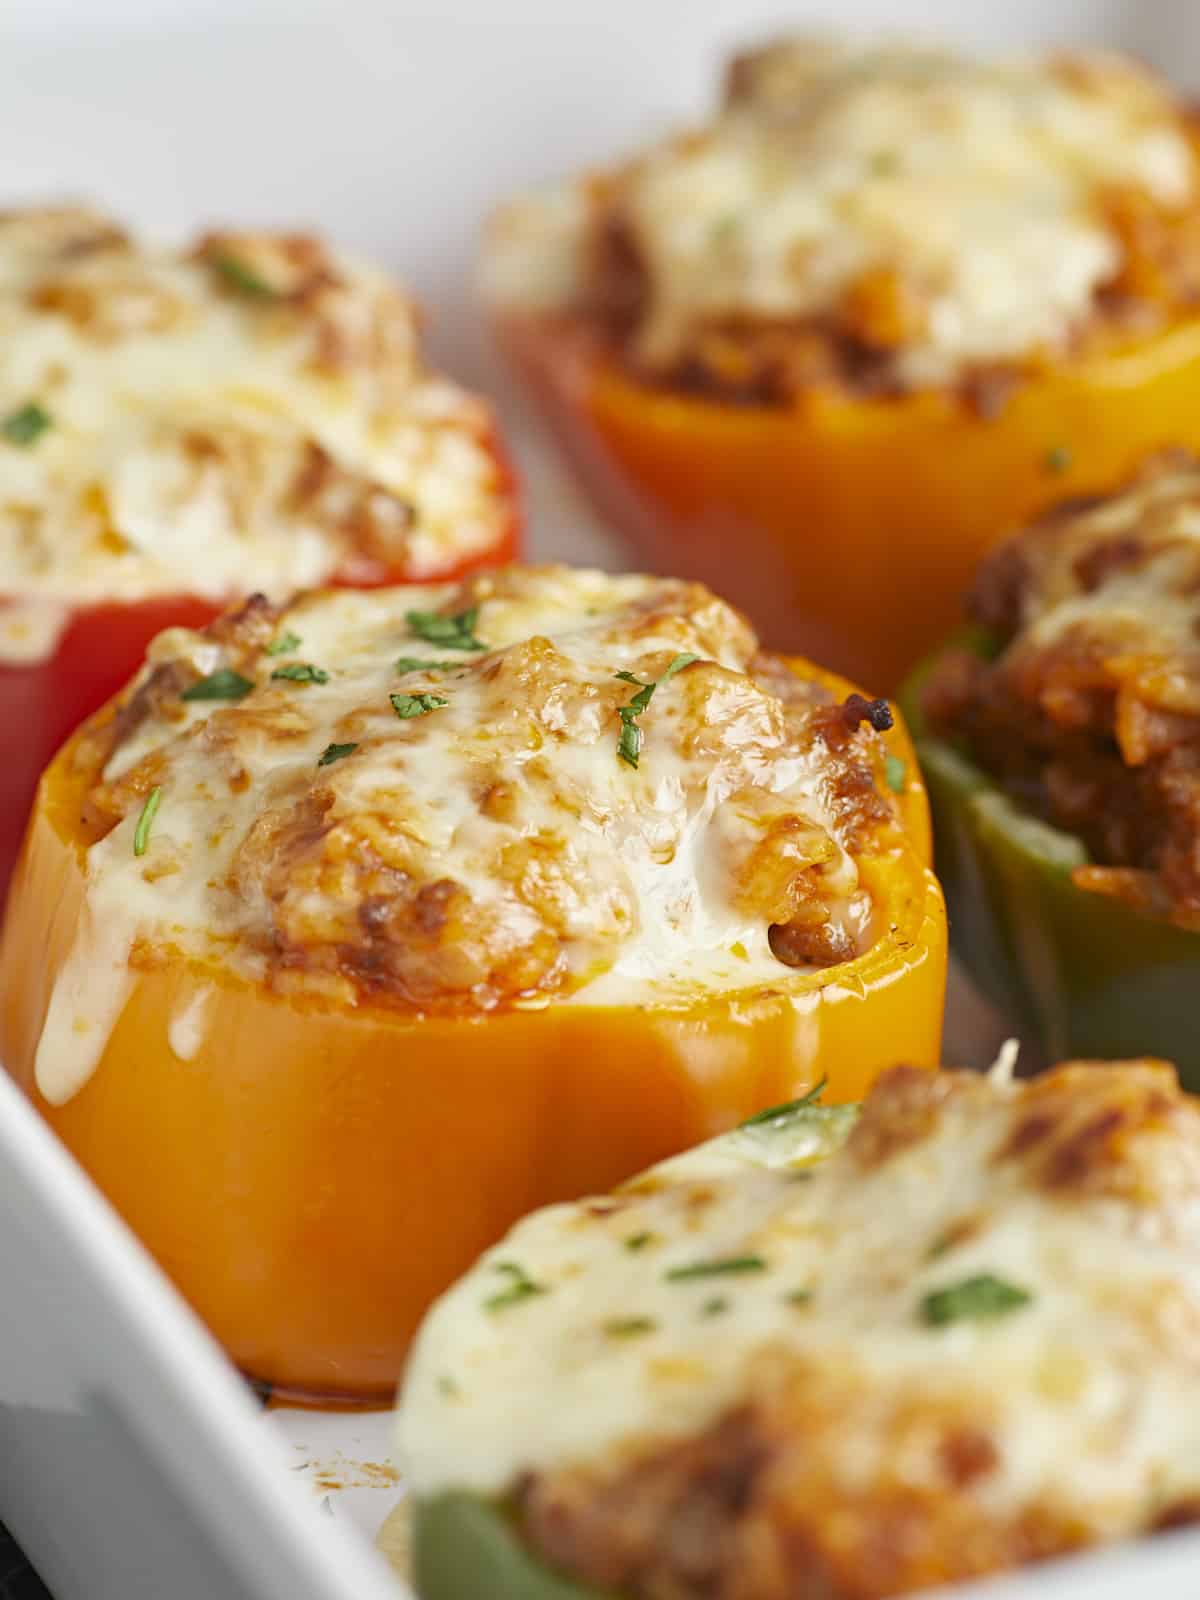 Close up side view of stuffed bell peppers in a casserole dish garnished with parsley.